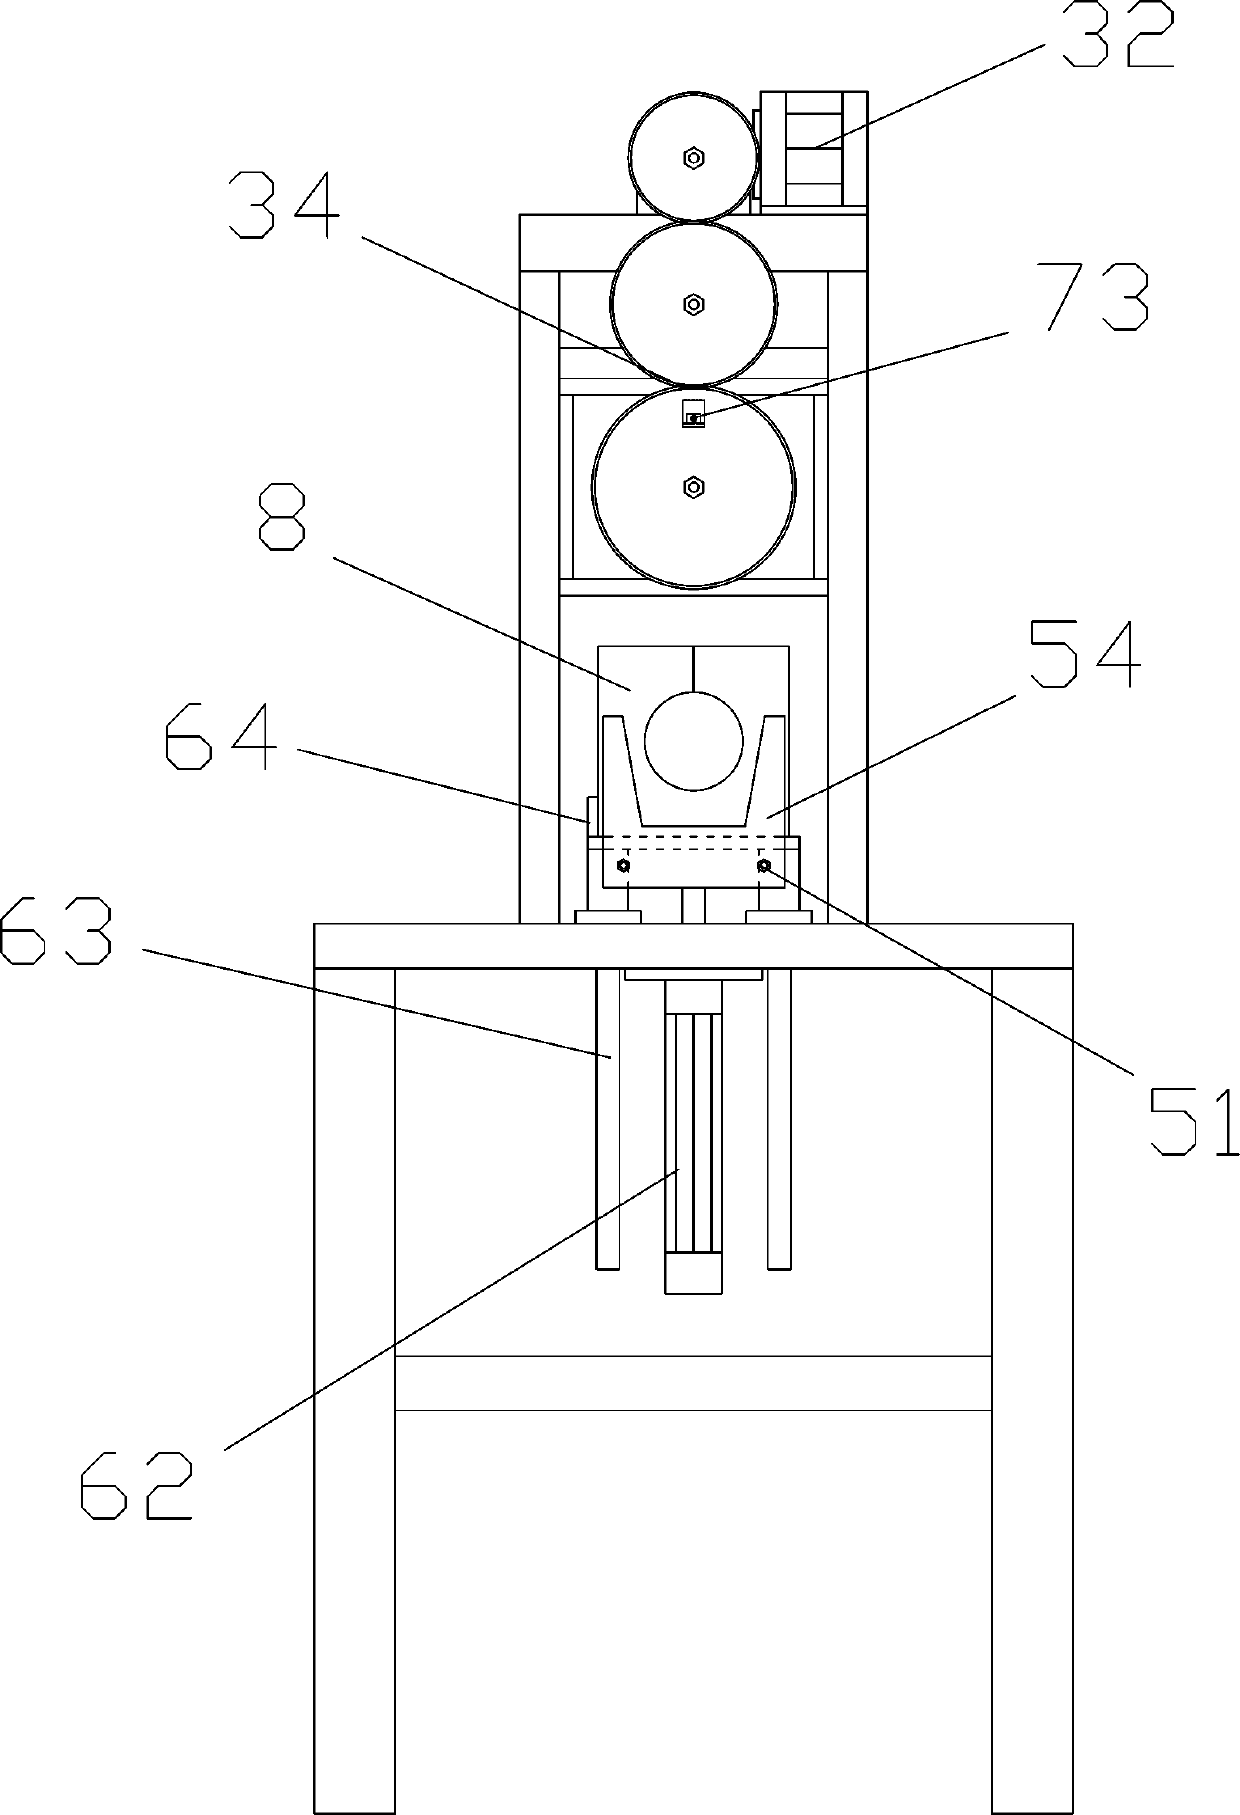 Opening device for packaging box foam lining plate